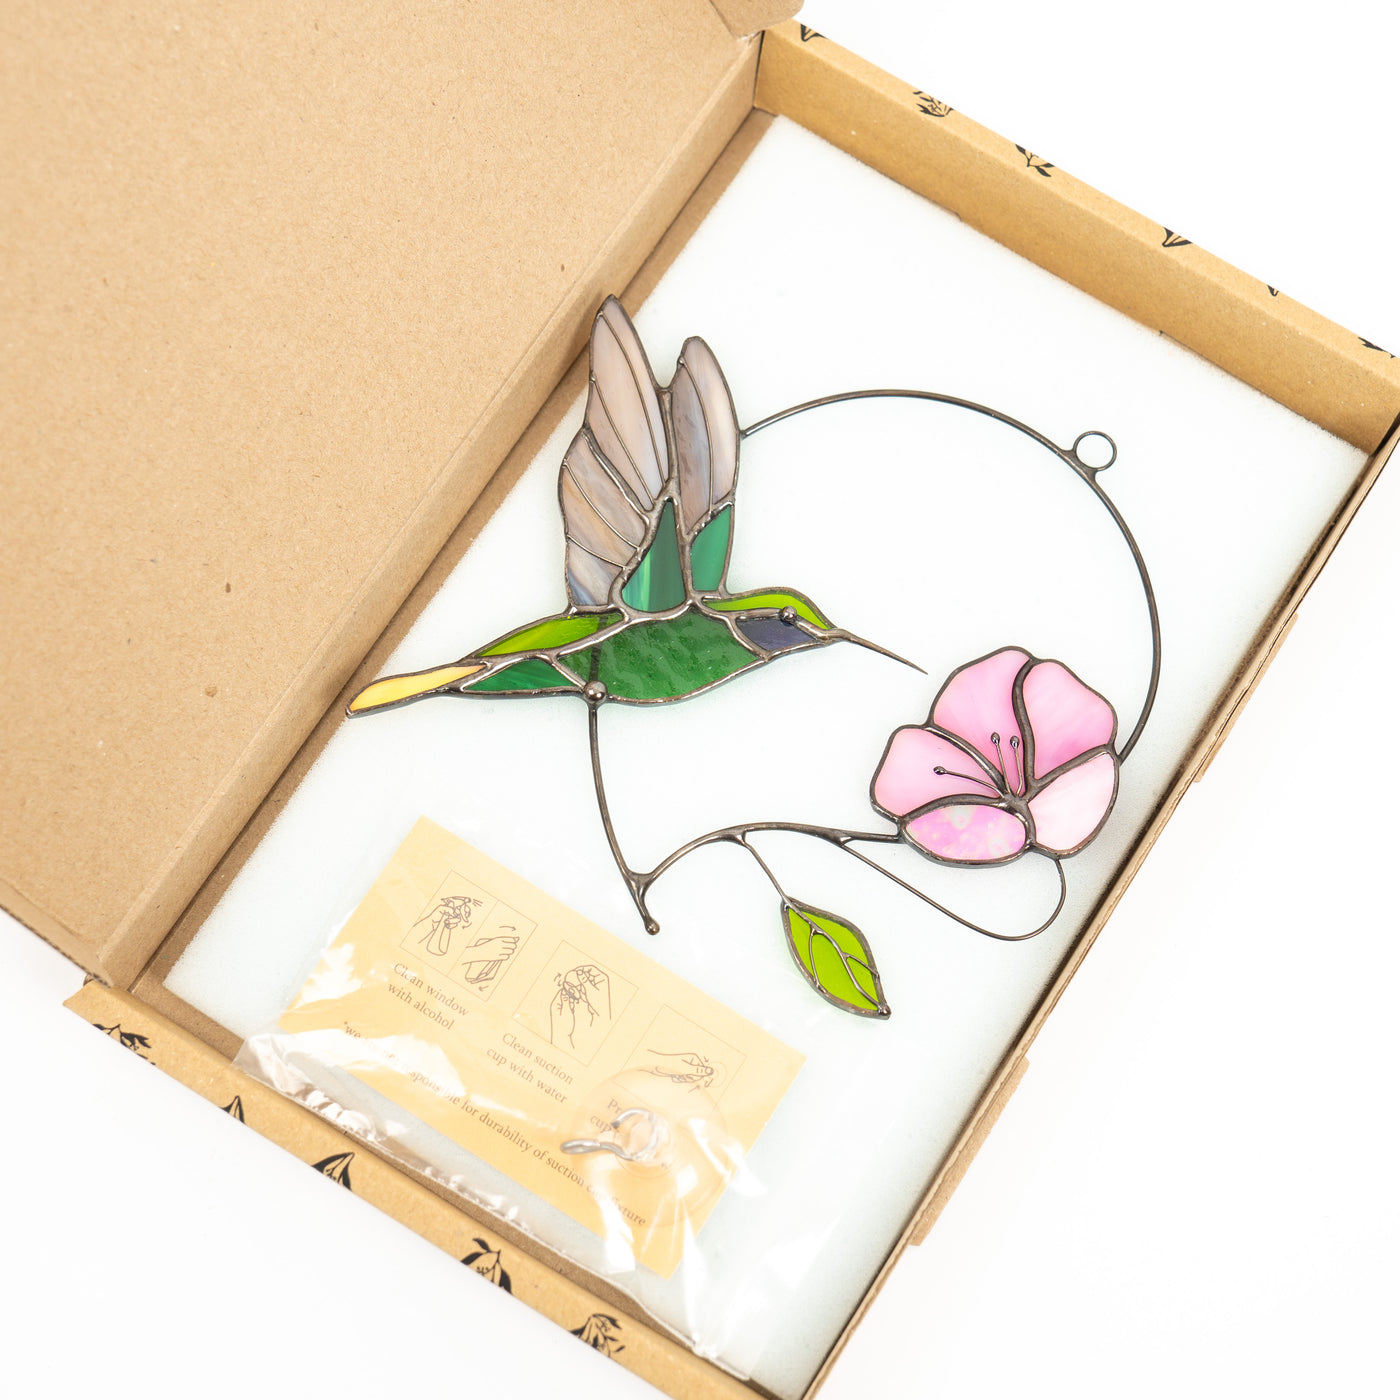 hummingbird with the pink flower stained glass window hanging in the brand box of Glass Art Stories 